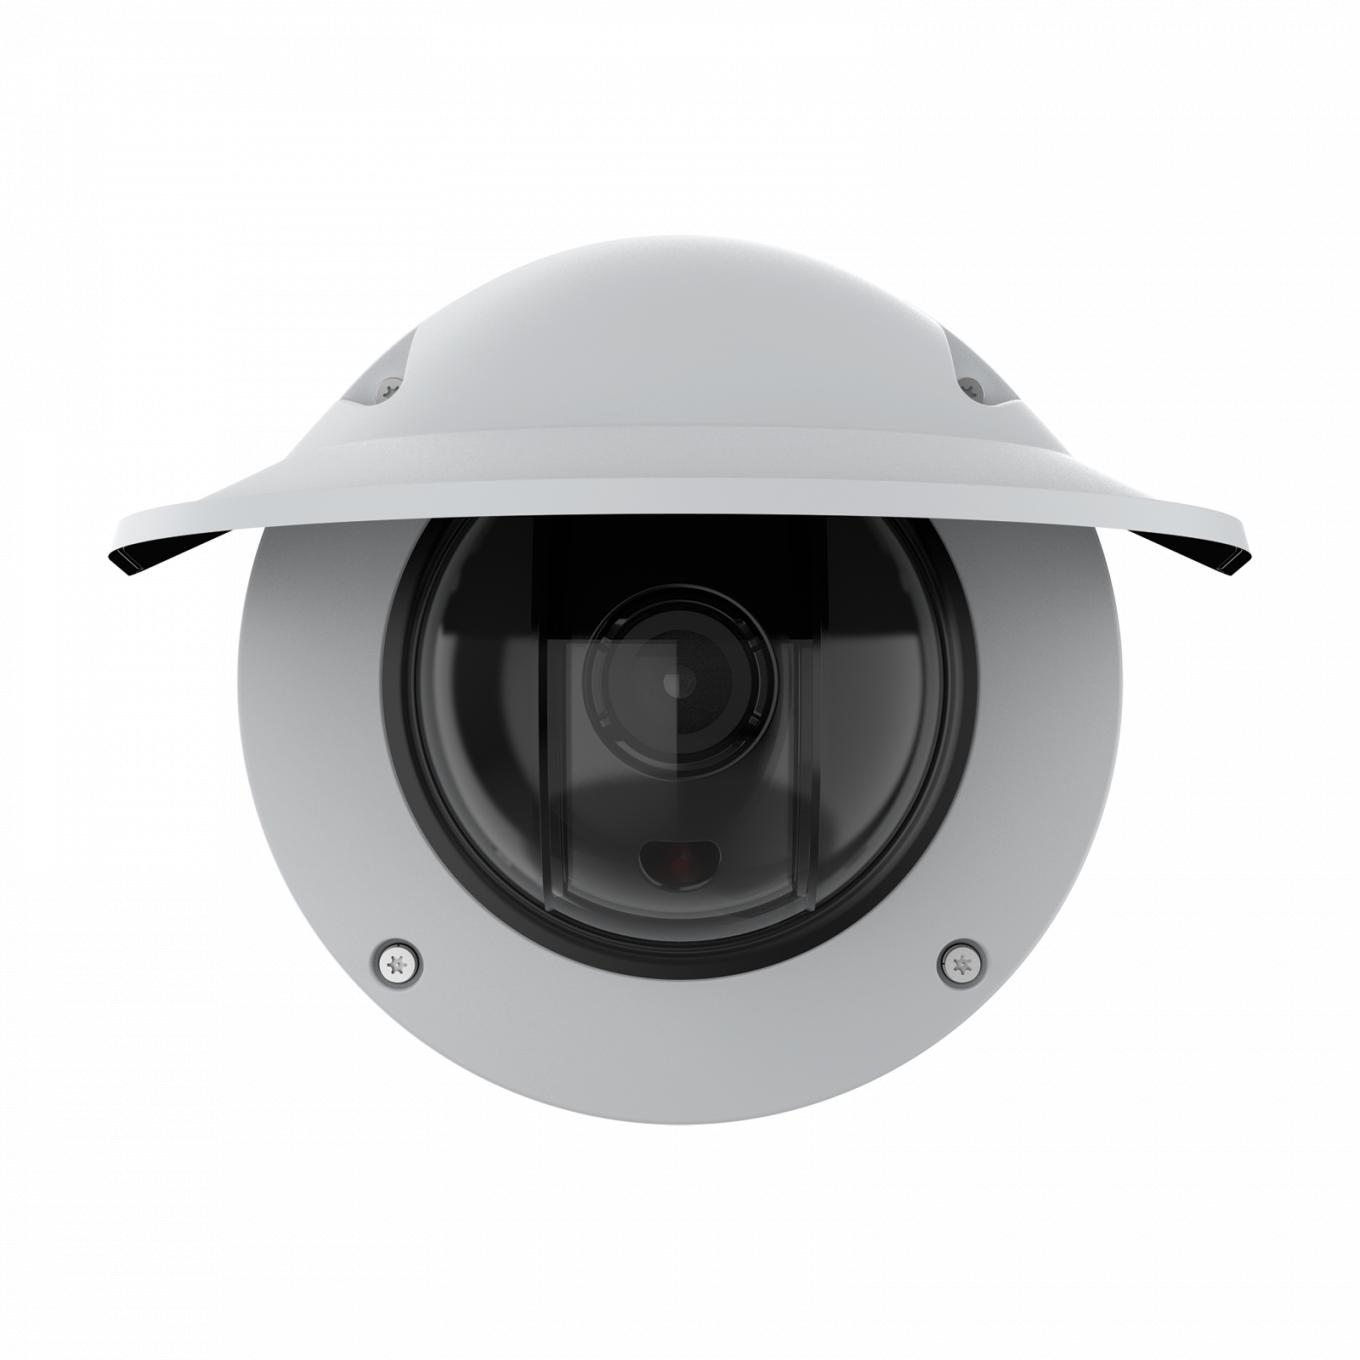 AXIS Q3538-LVE Dome Camera: Frontansicht